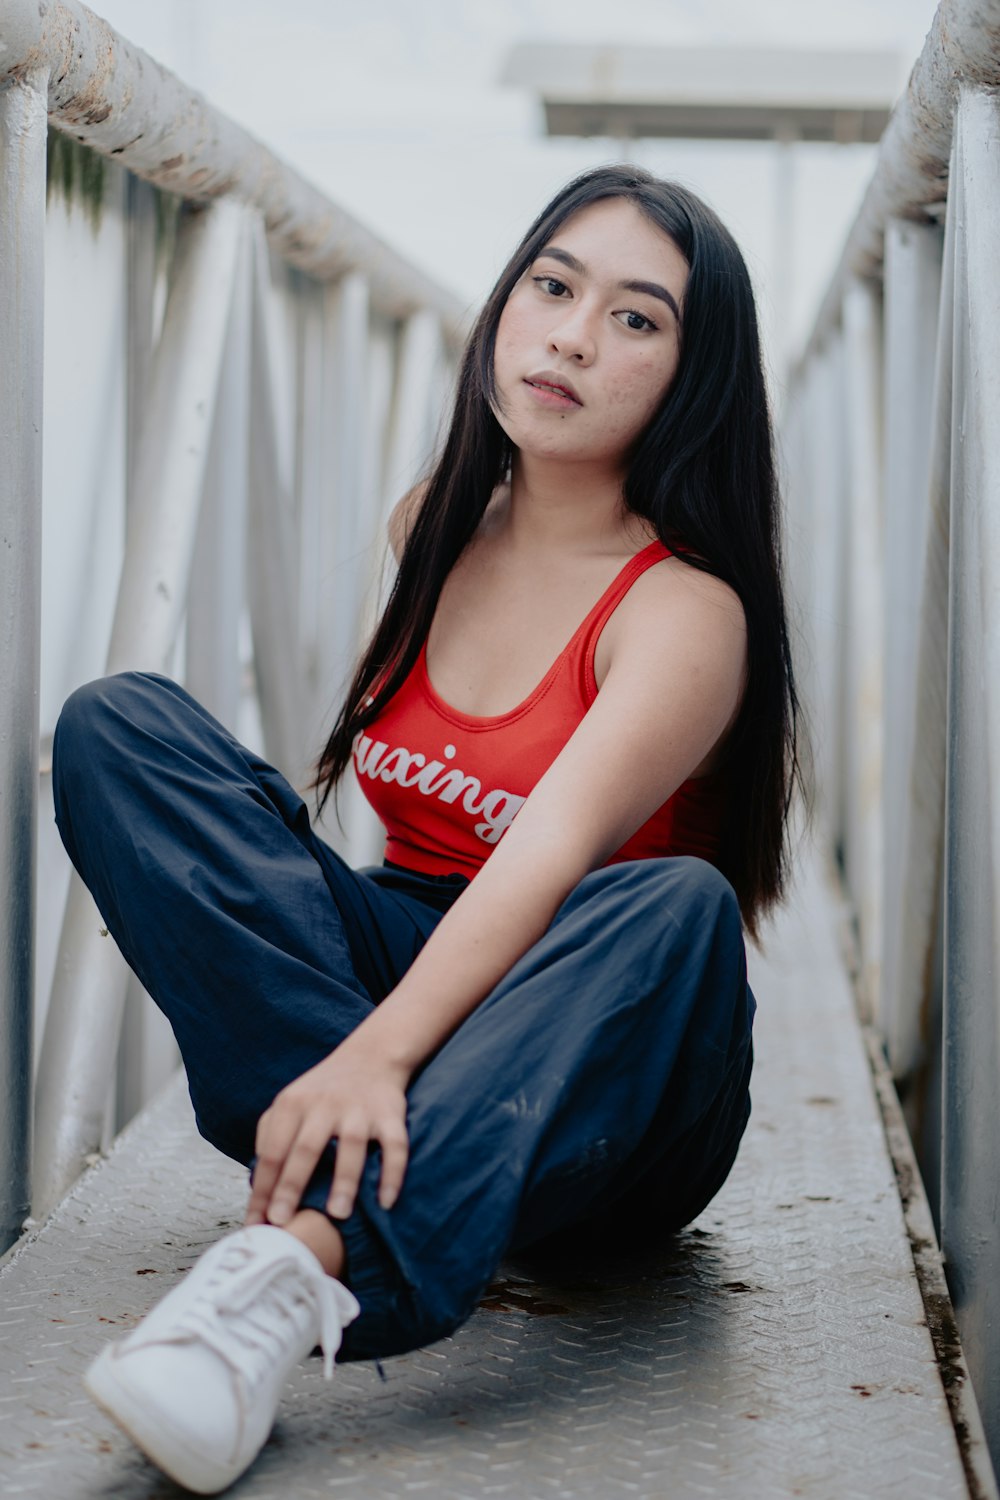 woman in red tank top and blue denim jeans sitting on concrete floor